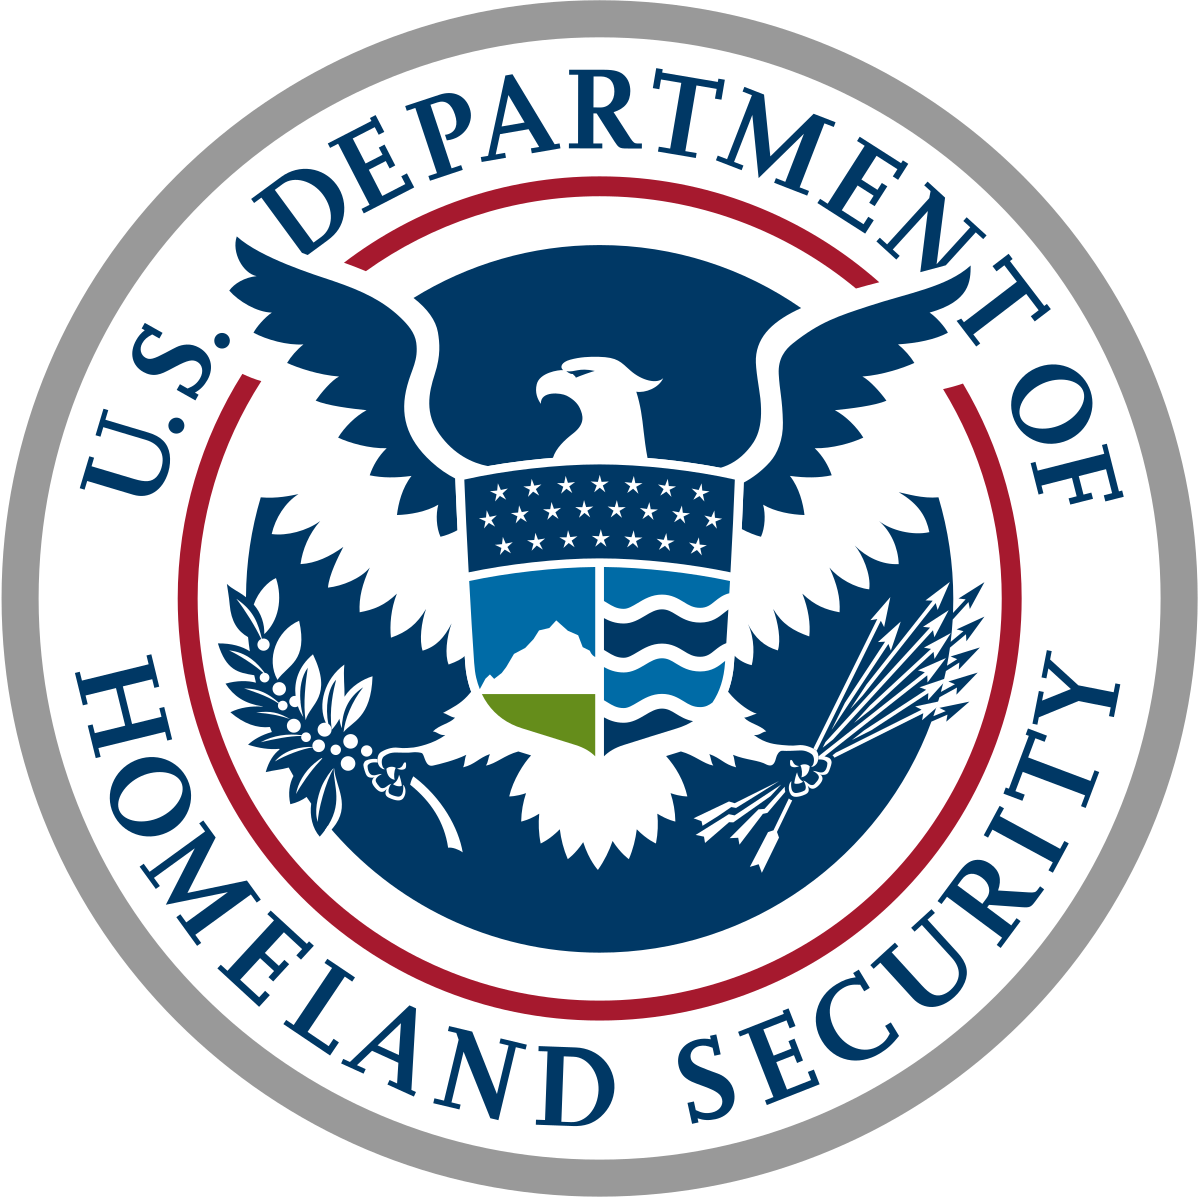 1200px-Seal_of_the_United_States_Department_of_Homeland_Security.svg